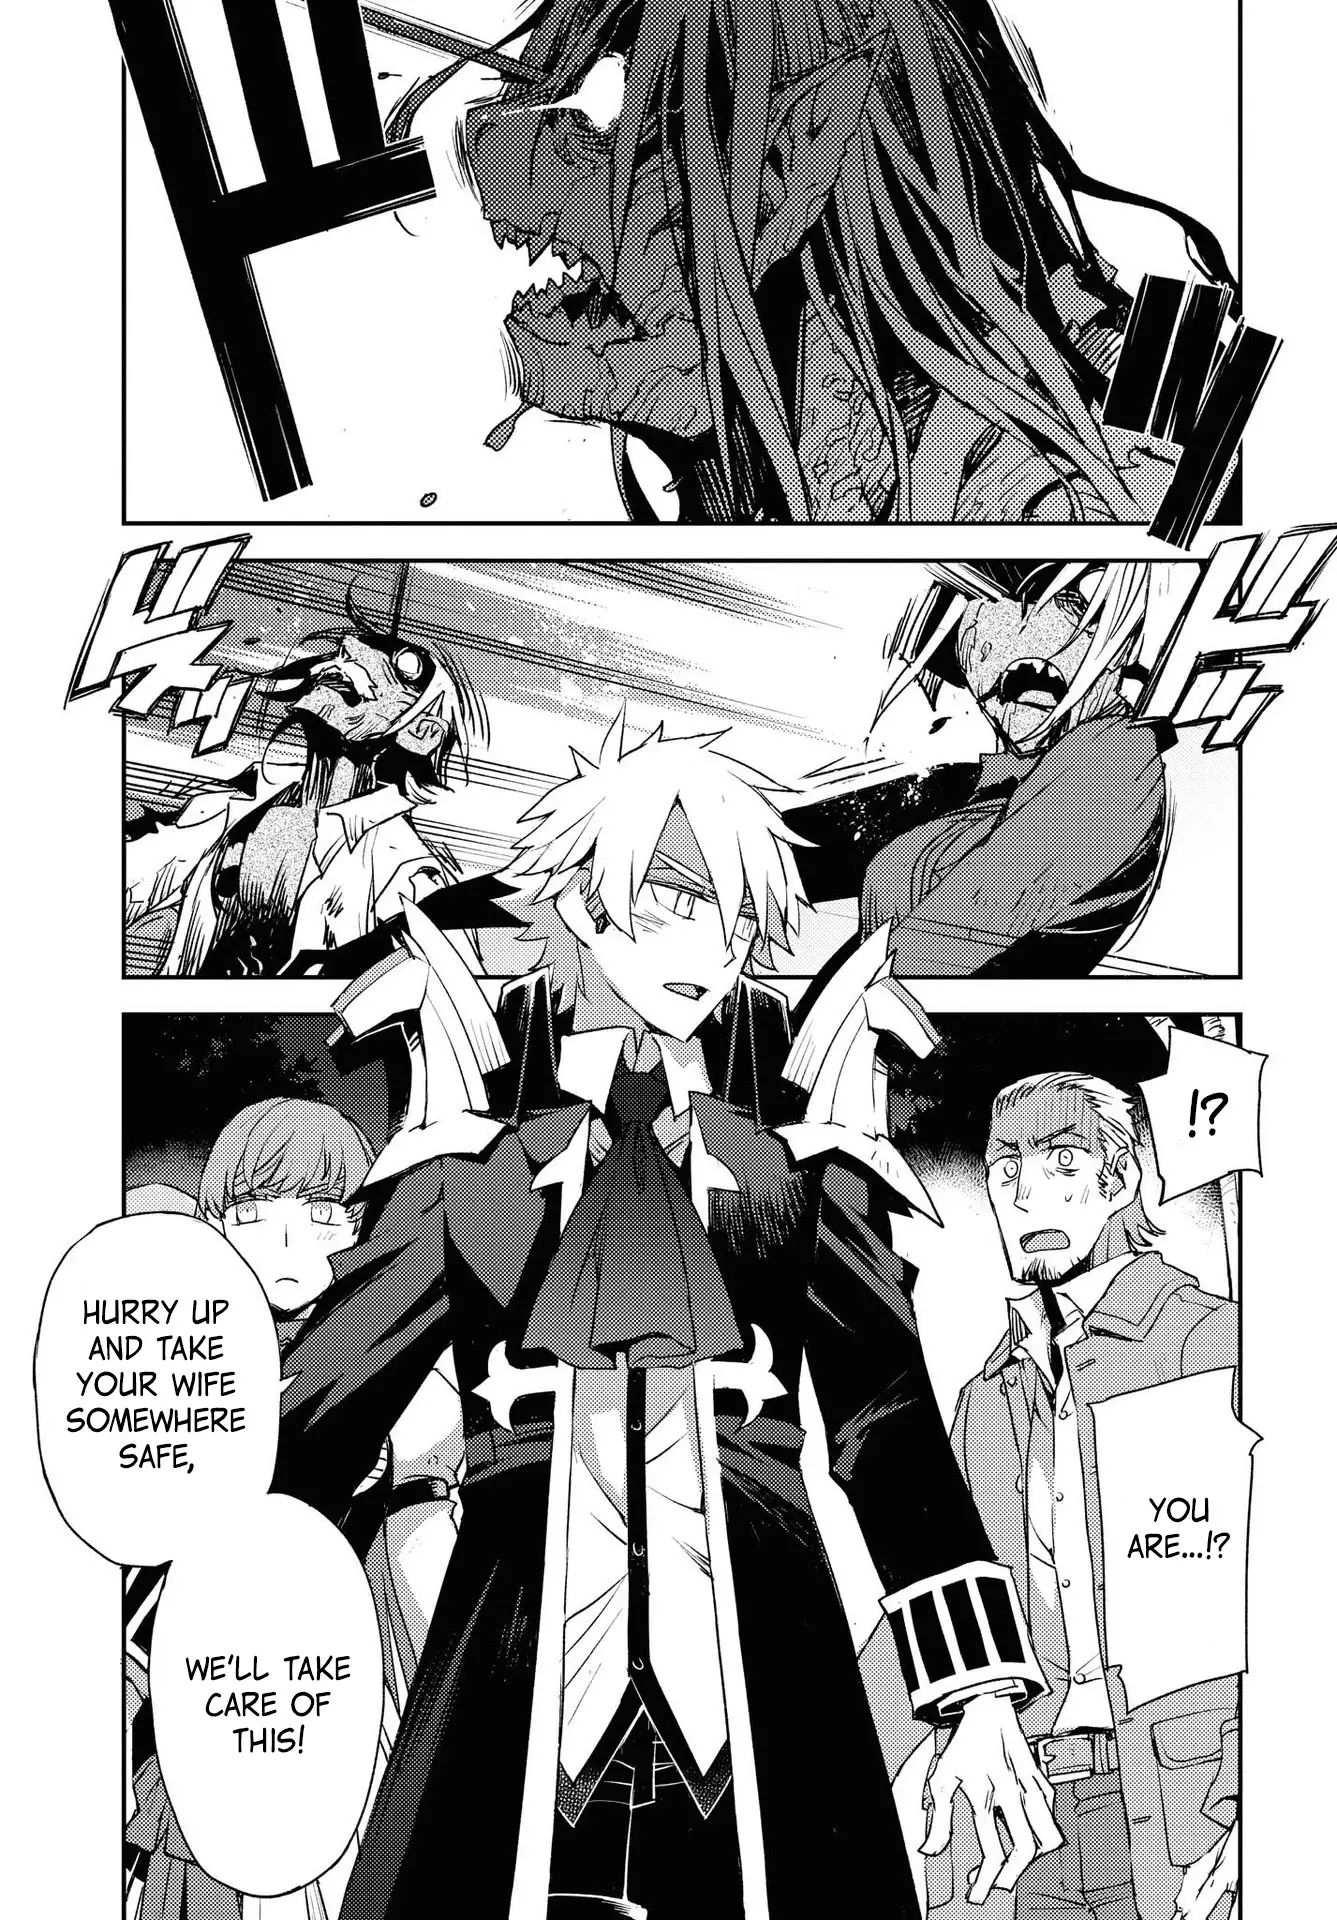 Fate/grand Order: Epic Of Remnant - Subspecies Singularity Iv: Taboo Advent Salem: Salem Of Heresy - 16 page 27